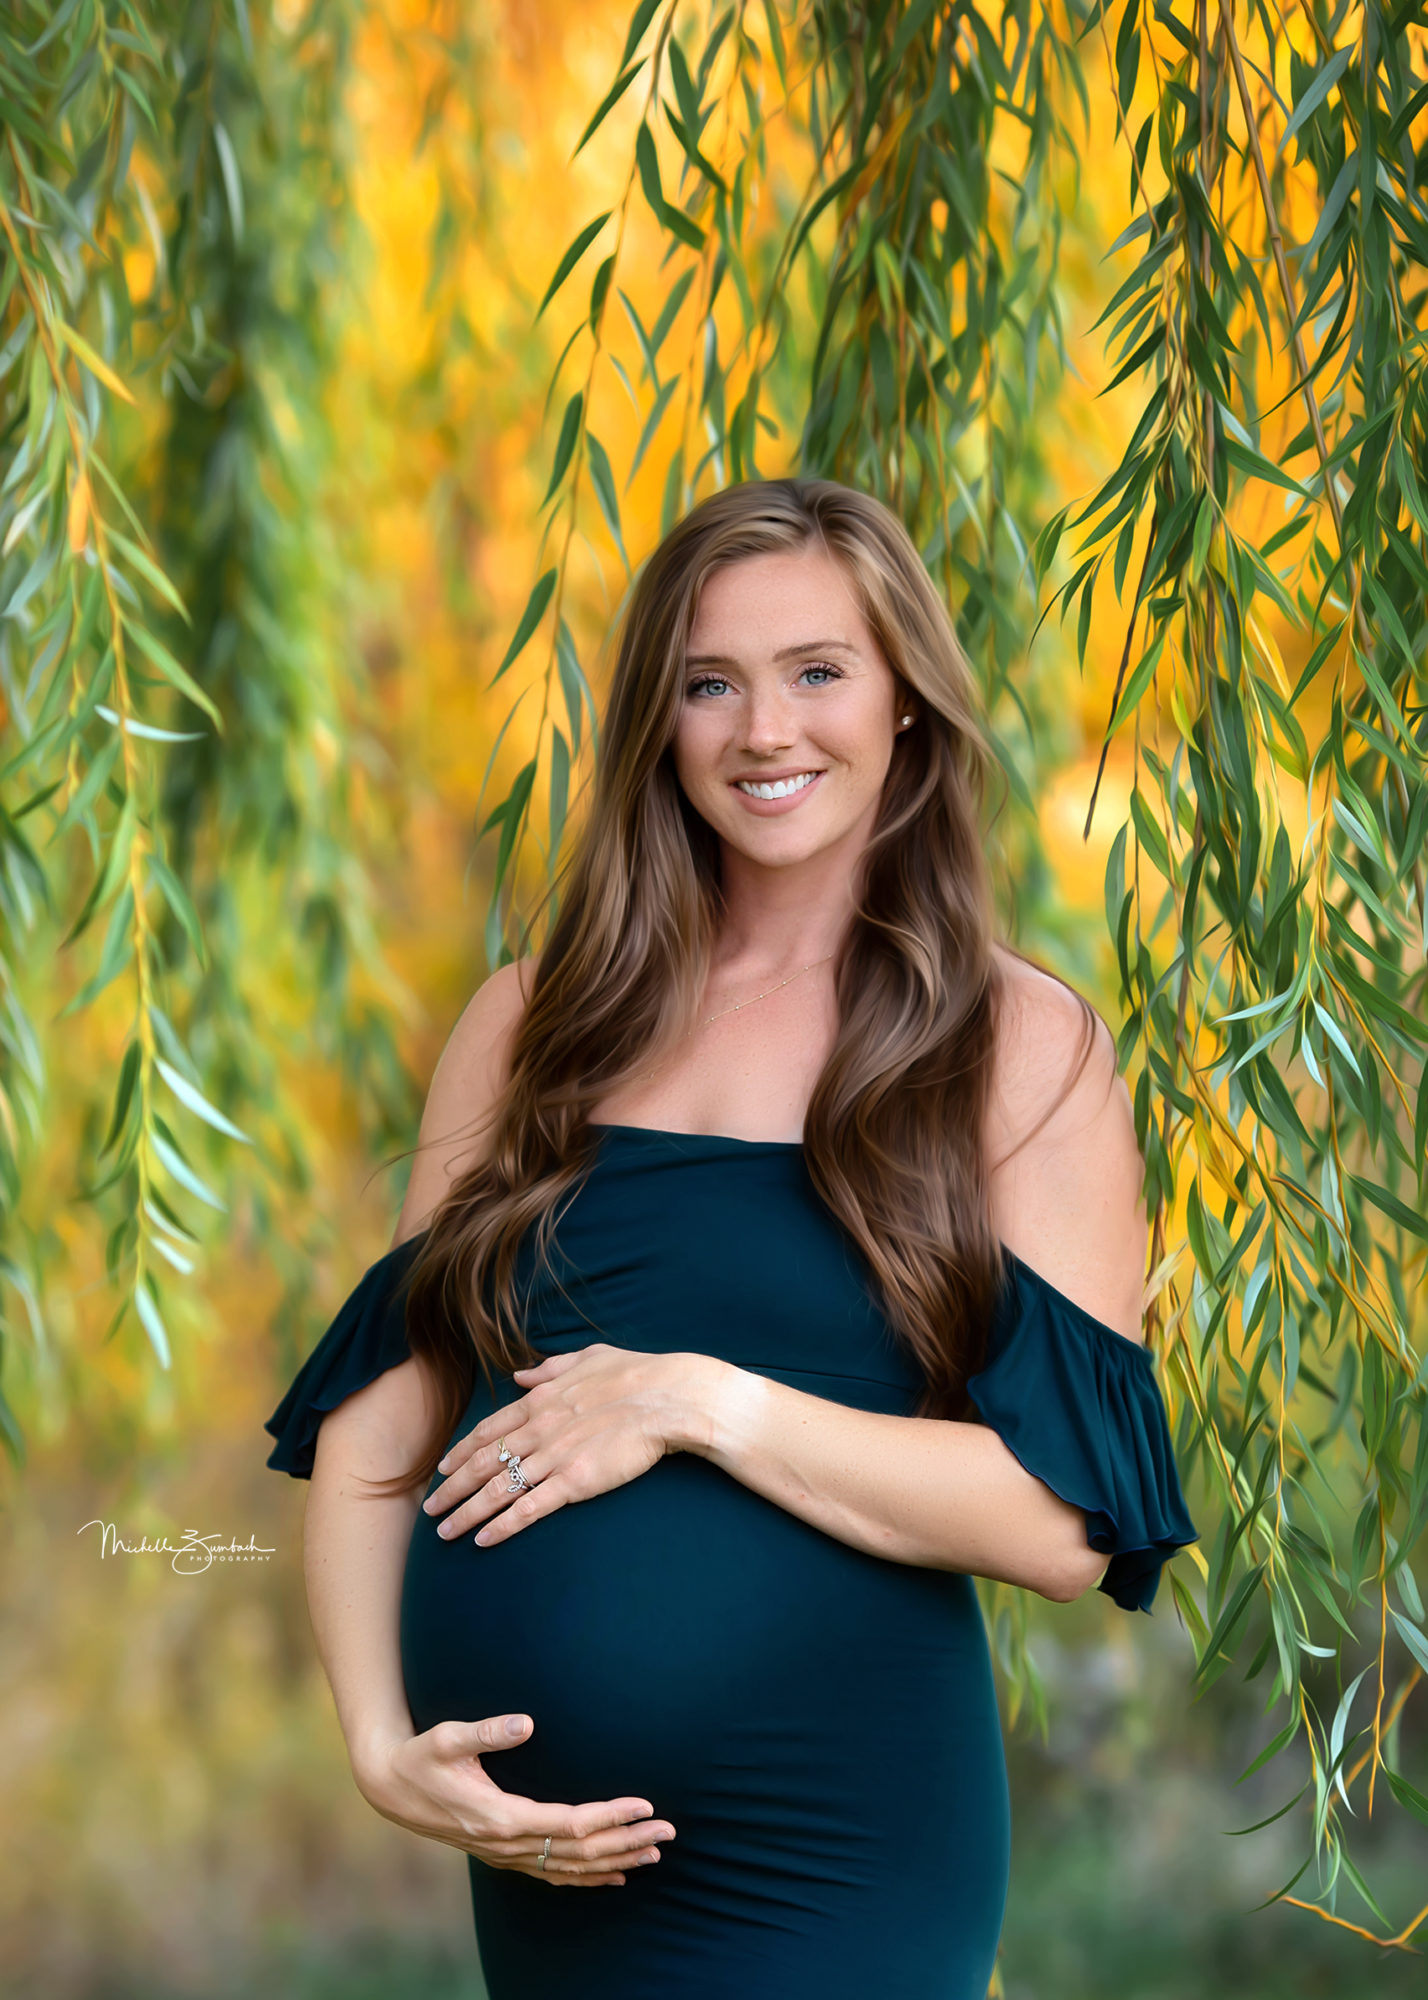 Meet Palo IA Photographer Michelle Zumbach who specializes in senior, family, children, maternity & baby photography available in Palo, Cedar Rapids and Coralville, IA.